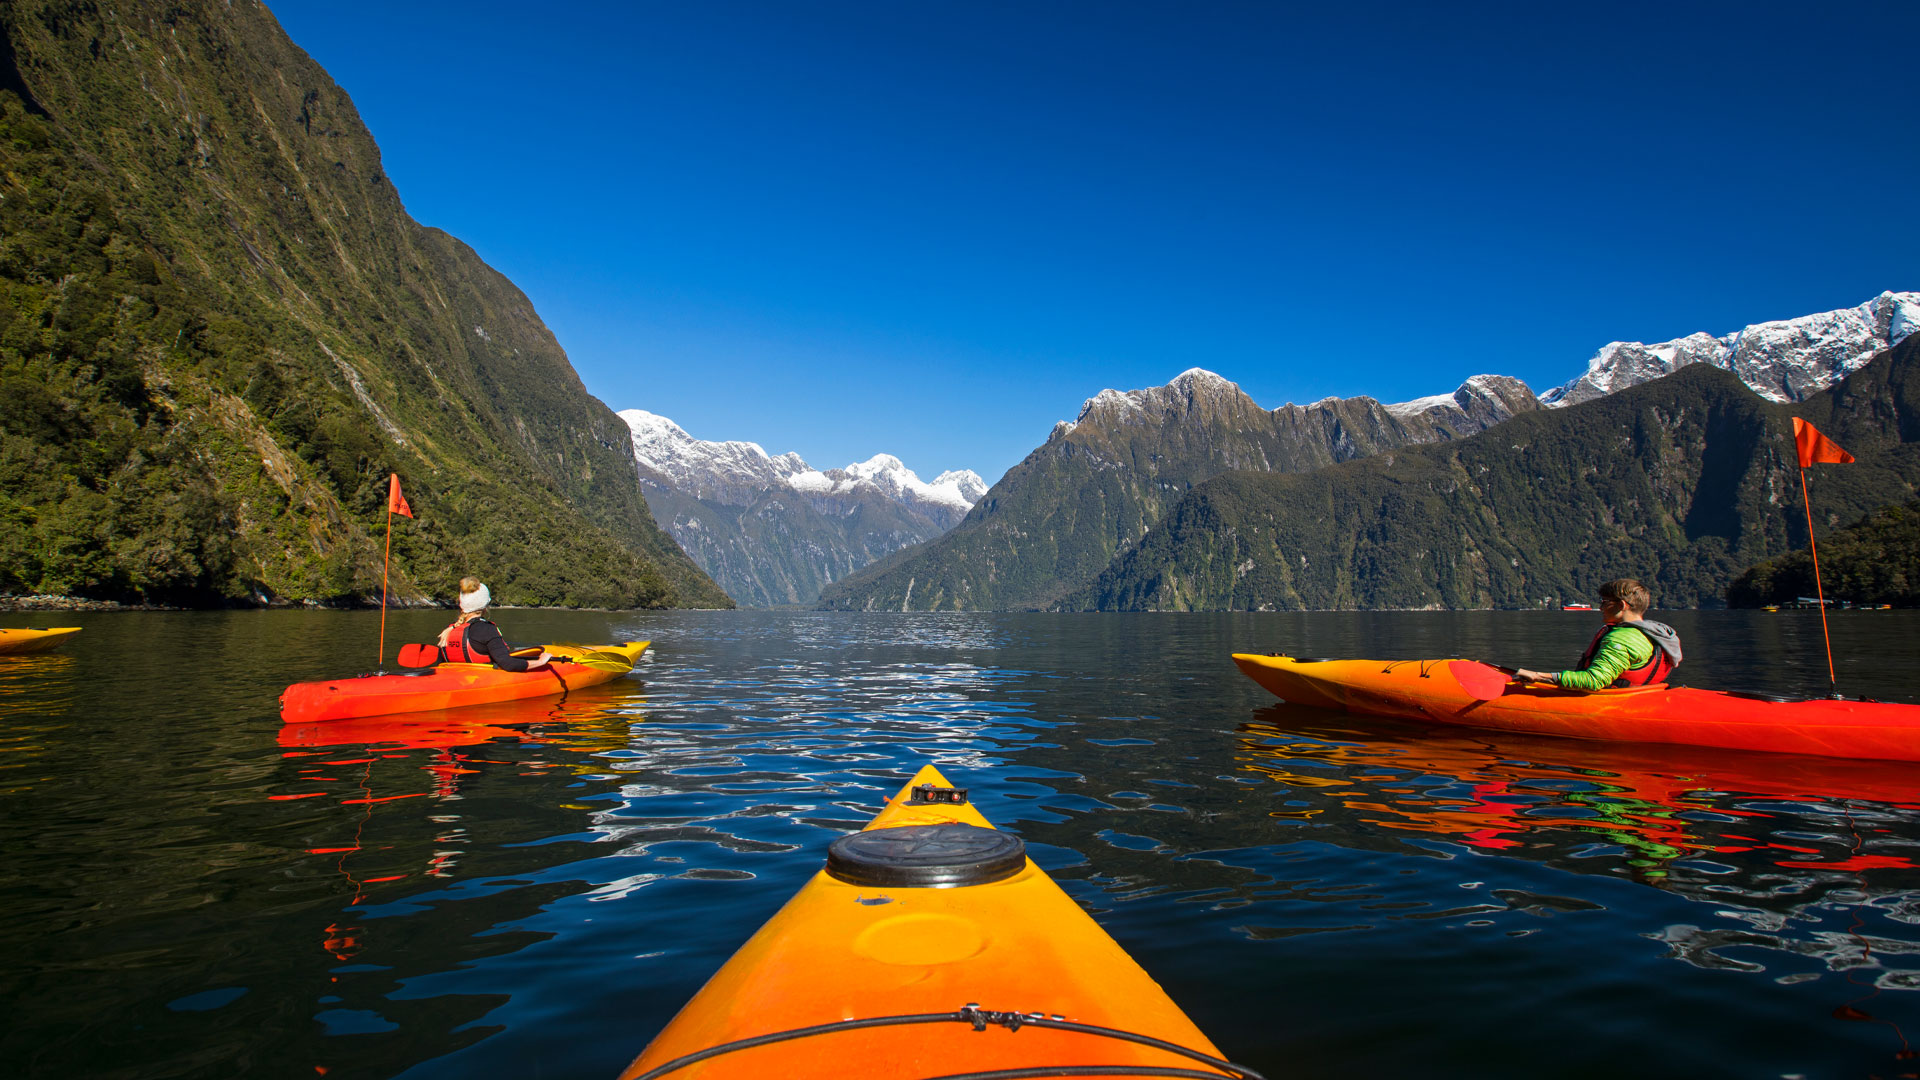 Kayak tour guide taking a group of kayakers on a tour in Fiordland, New Zealand.